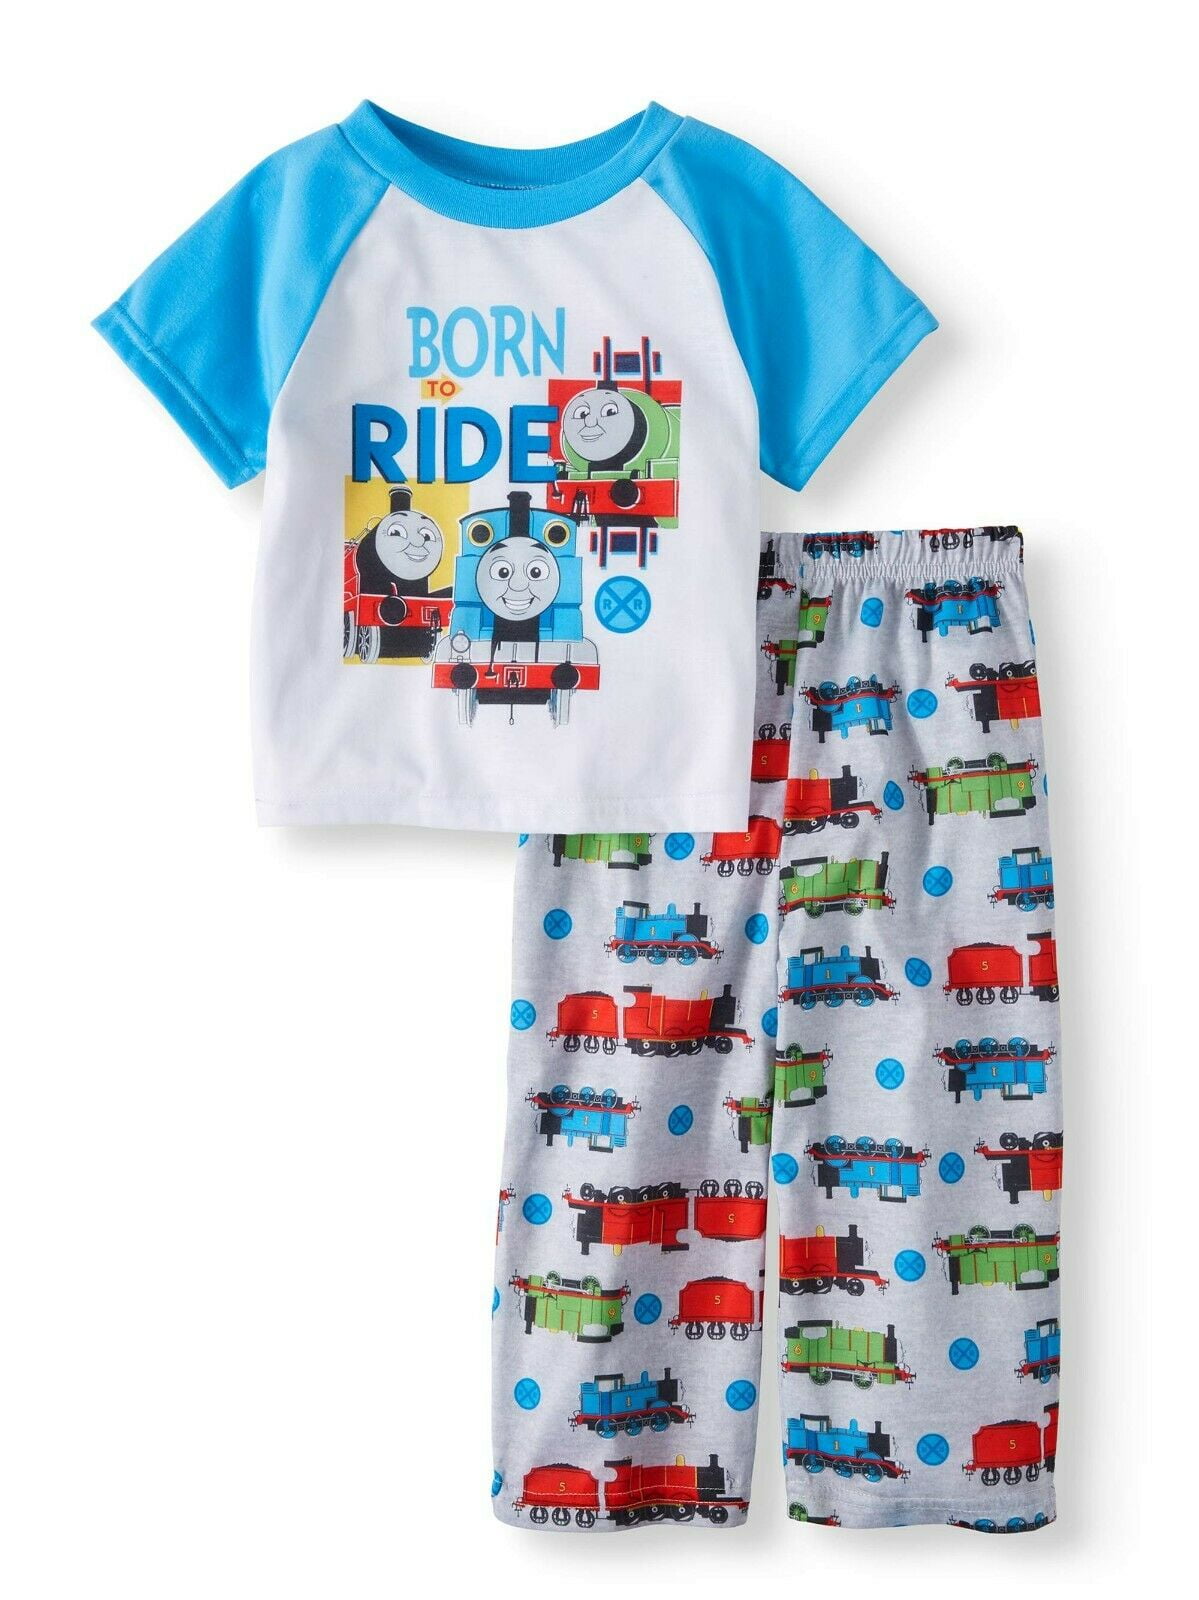 Thomas and Friends Short Sleeve Shirt & Pants Pajamas 3T New Fire Resistant 